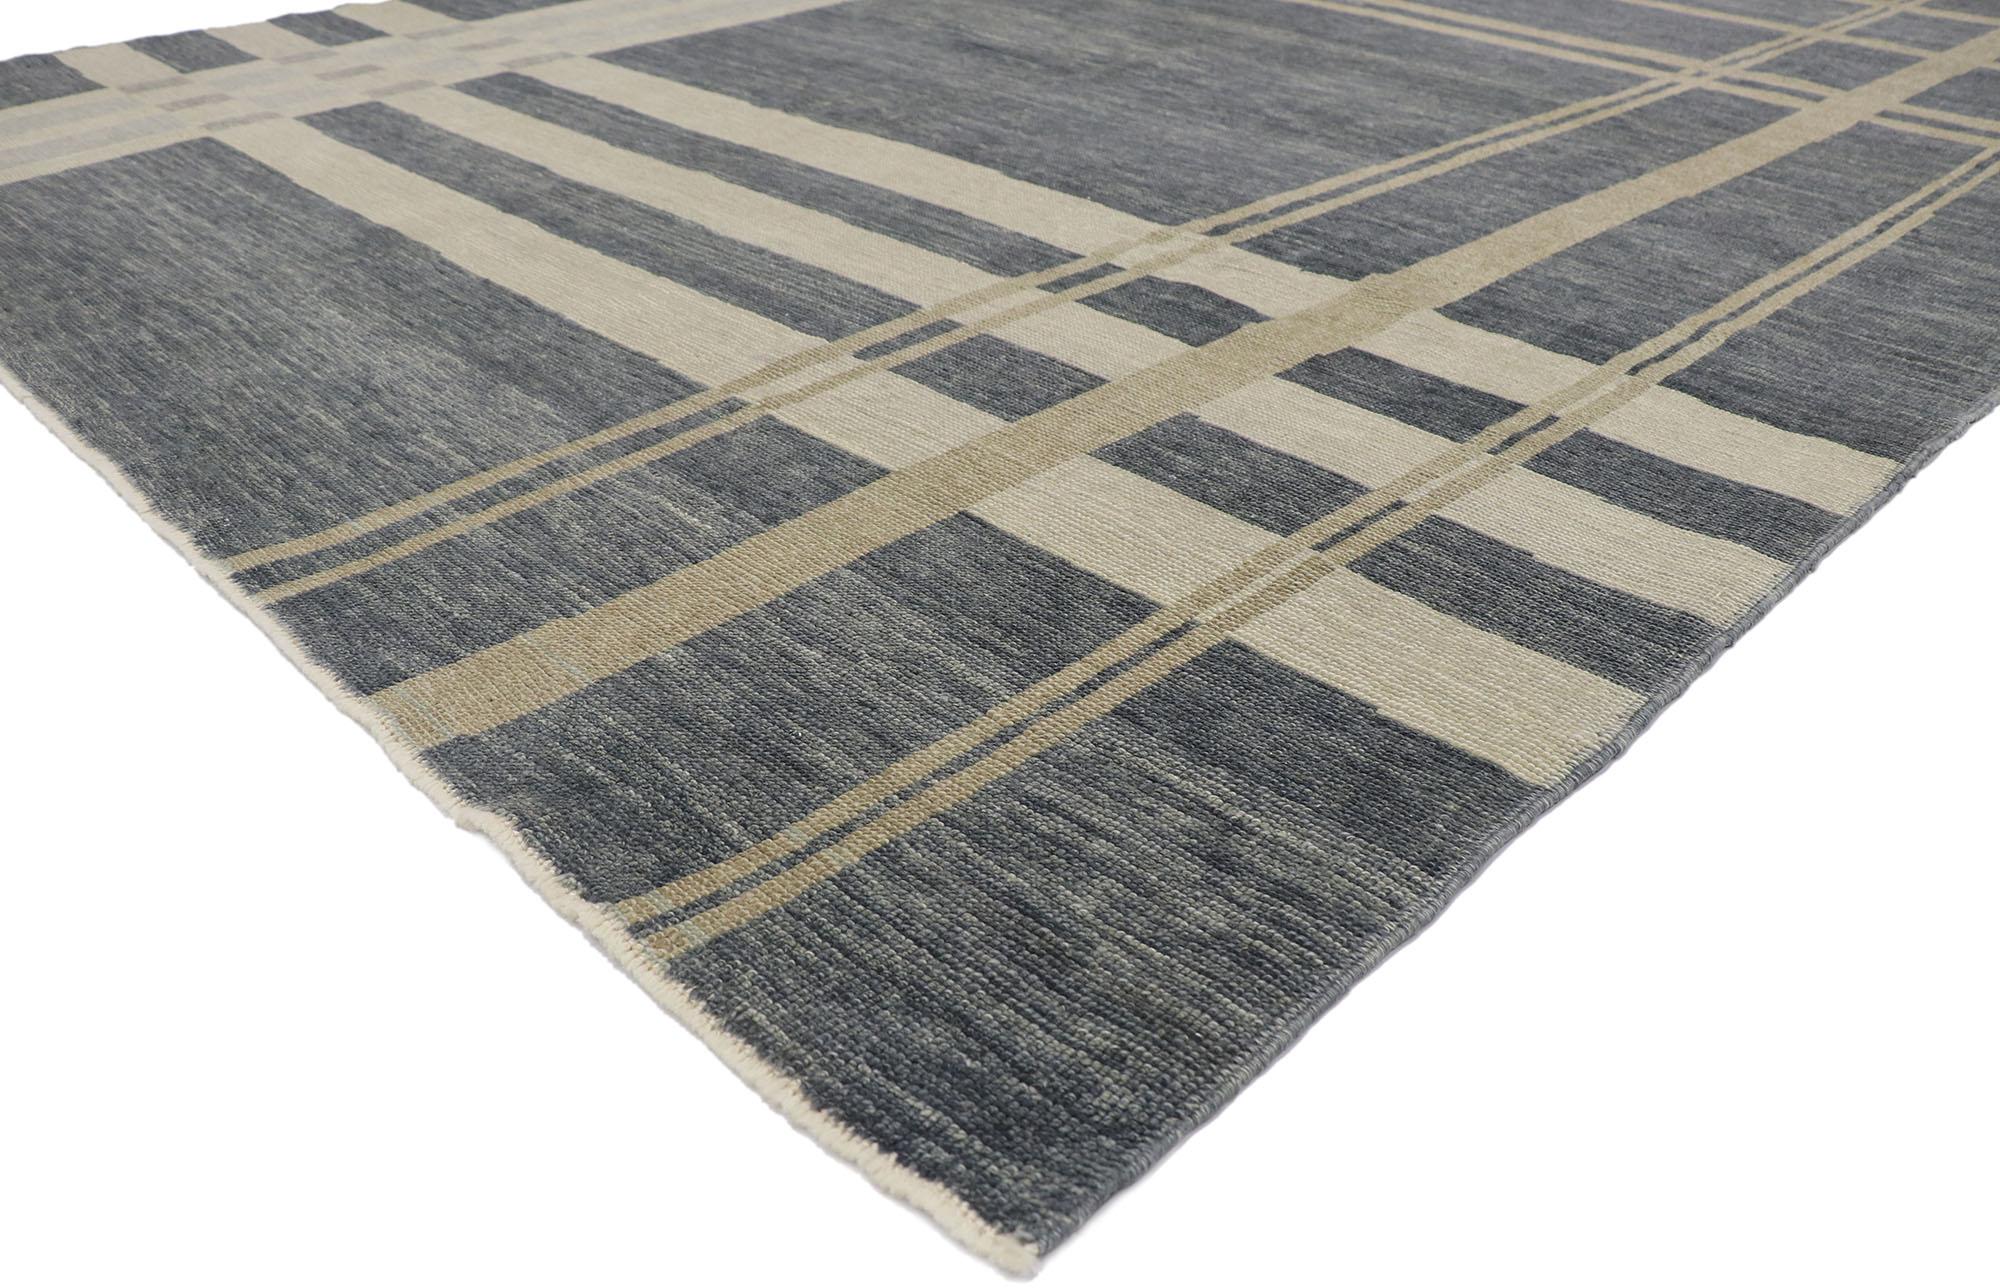 53566 New Modern Gray Plaid Tartan Rug with Ivy League style 08'08 x 11'01. Displaying a charming masculine appeal and the embodiment of ivy league style, this hand knotted wool contemporary plaid tartan rug is a captivating vision of woven beauty